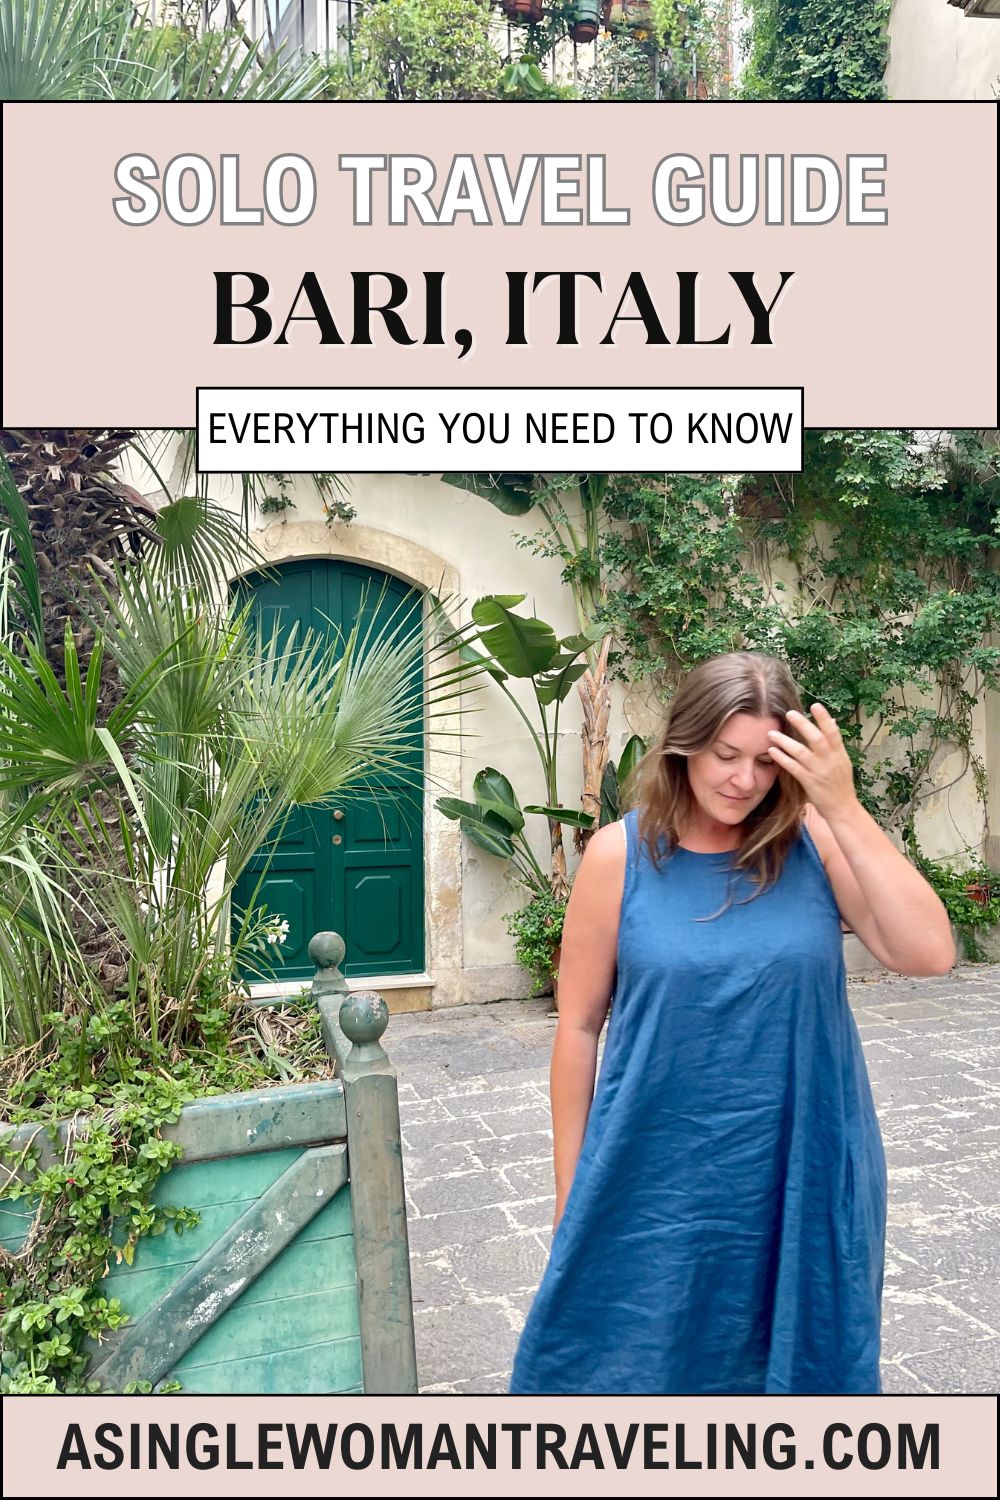 olo Travel Guide to Bari, Italy. A woman in a blue dress stands in front of a green door surrounded by lush greenery. Text overlay reads 'Solo Travel Guide Bari, Italy' and 'Everything You Need to Know'. Website 'asinglewomantraveling.com' is also mentioned.